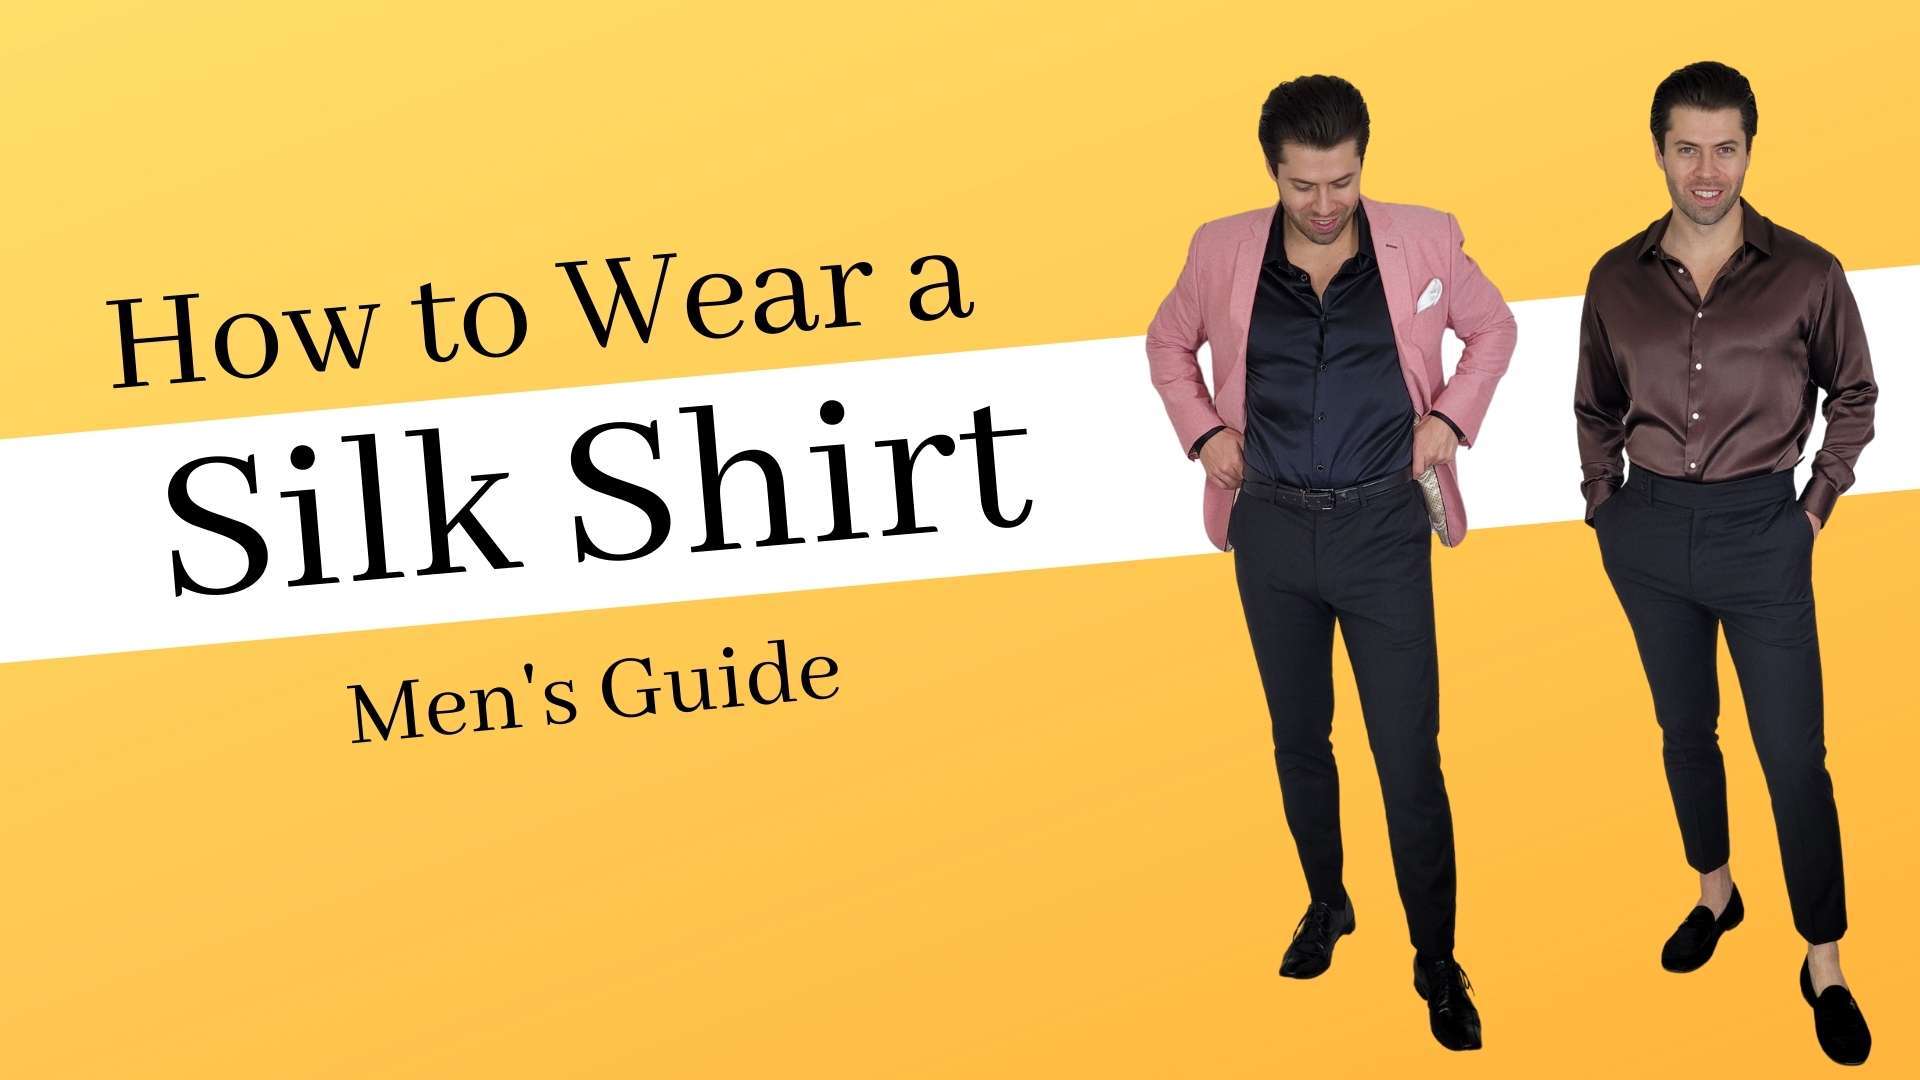 how to wear a silk shirt mens guide header image